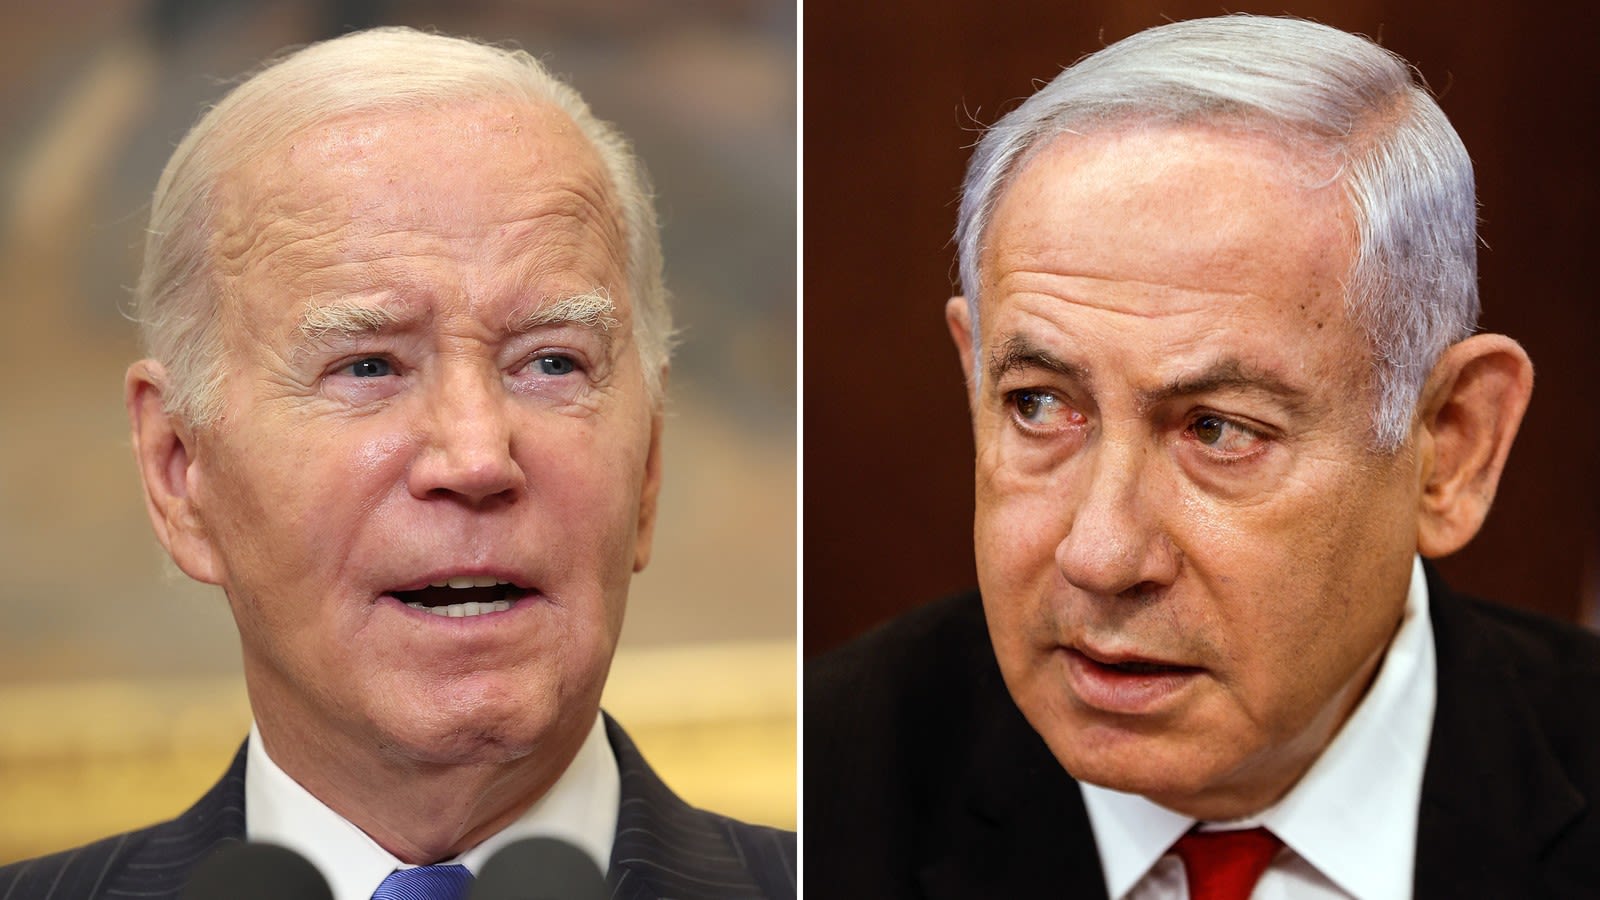 President Joe Biden spoke by phone with Netanyahu, and made clear that the US would not participate...